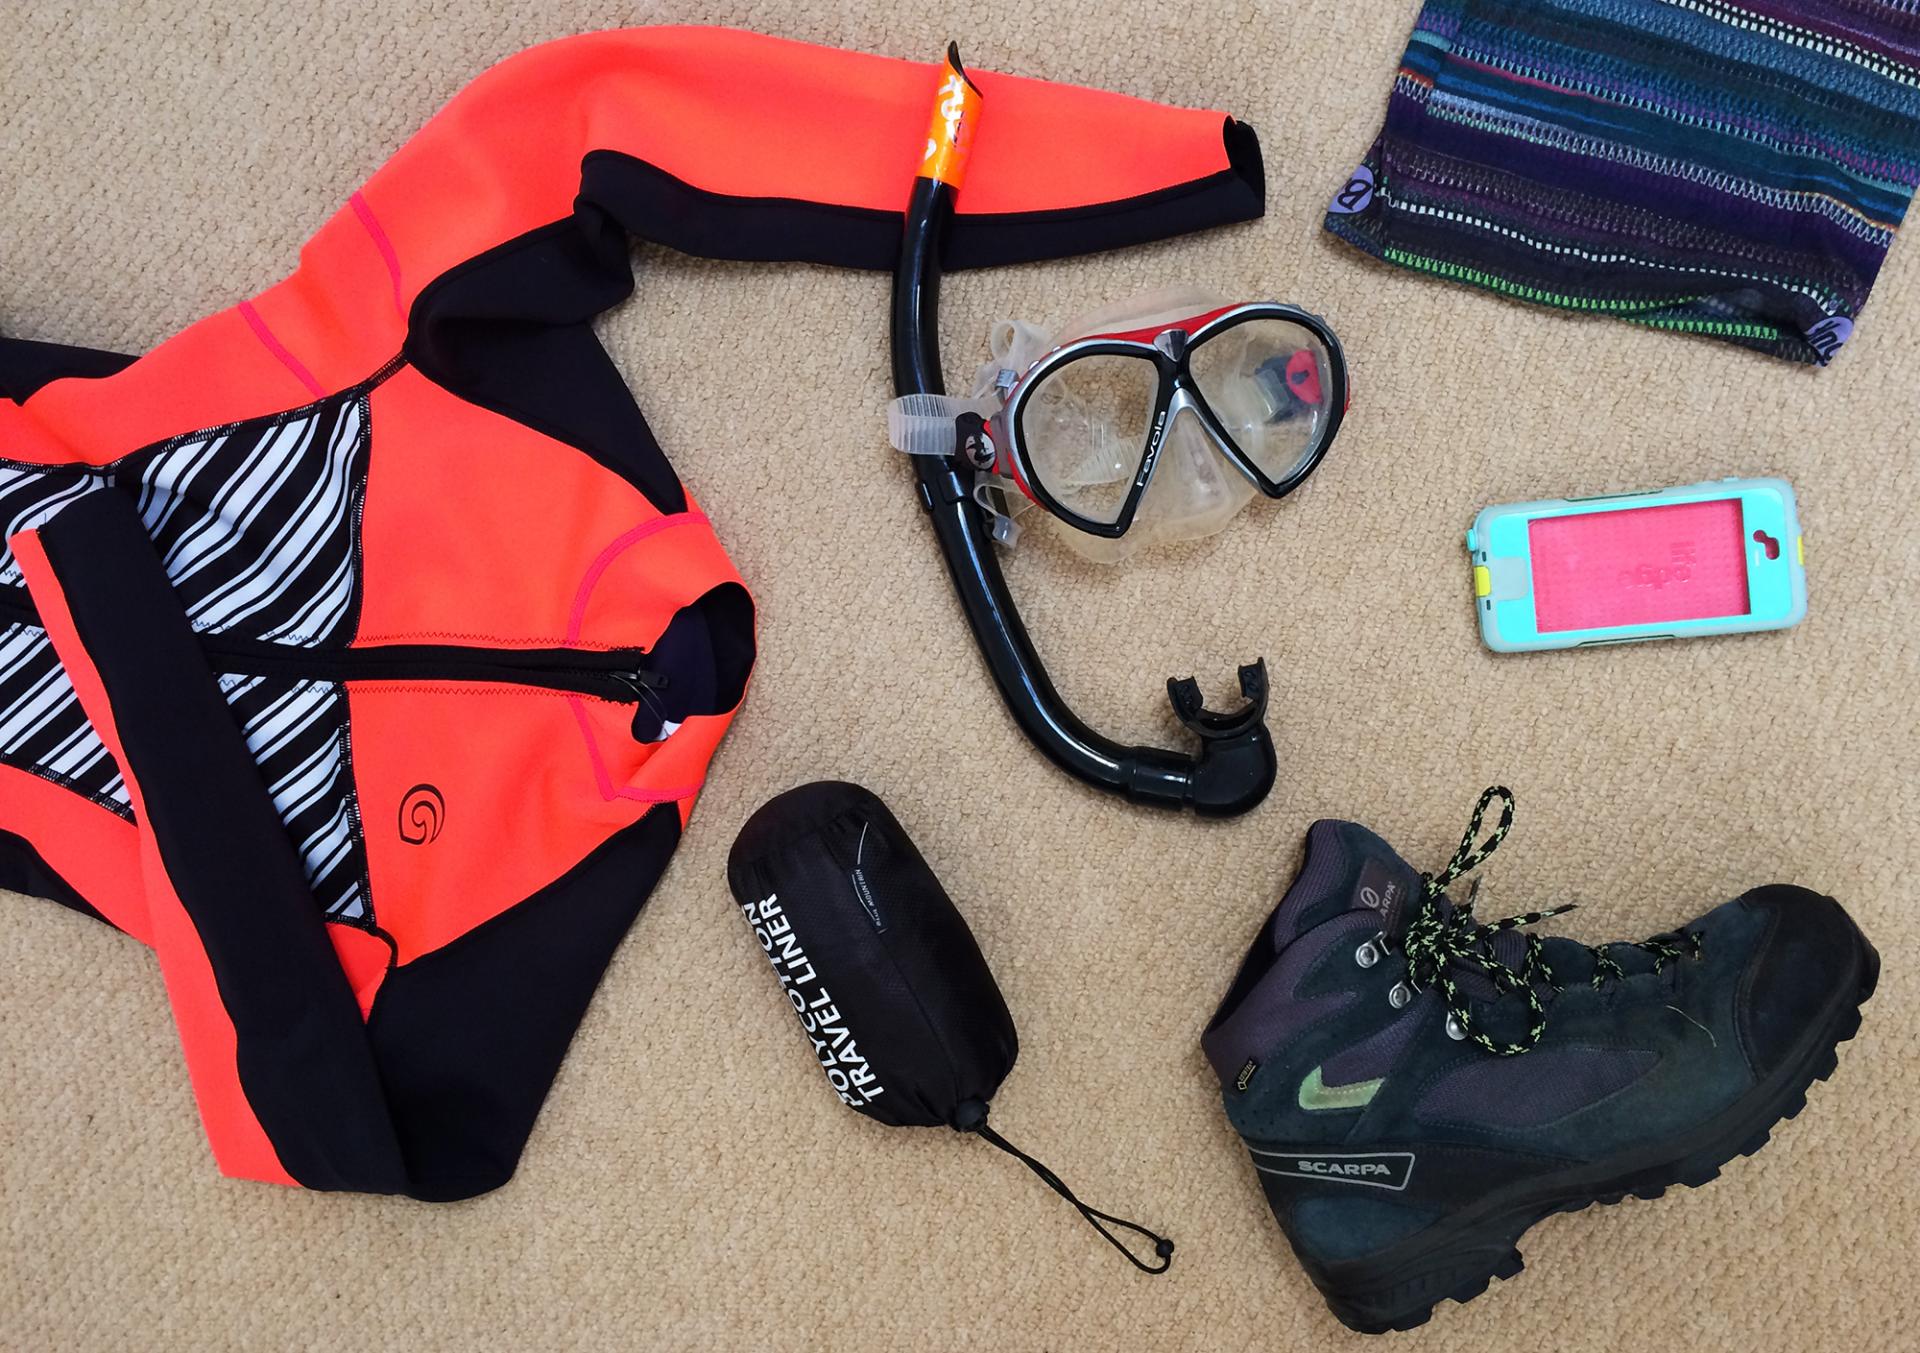 Video: My essential kit for adventure travel